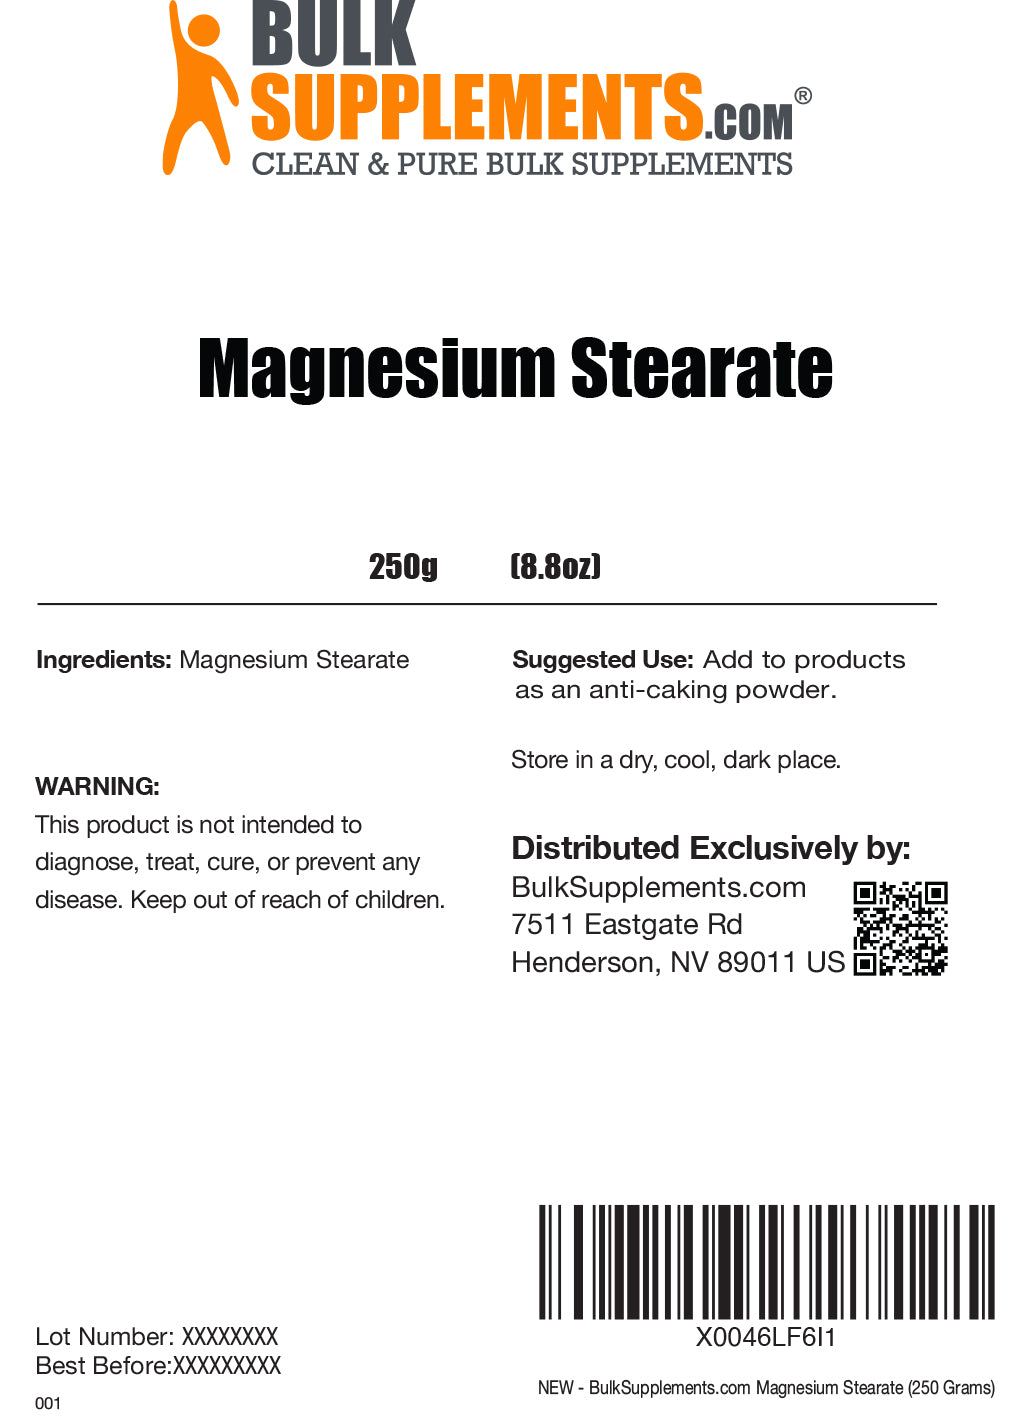 Magnesium stearate 250g label